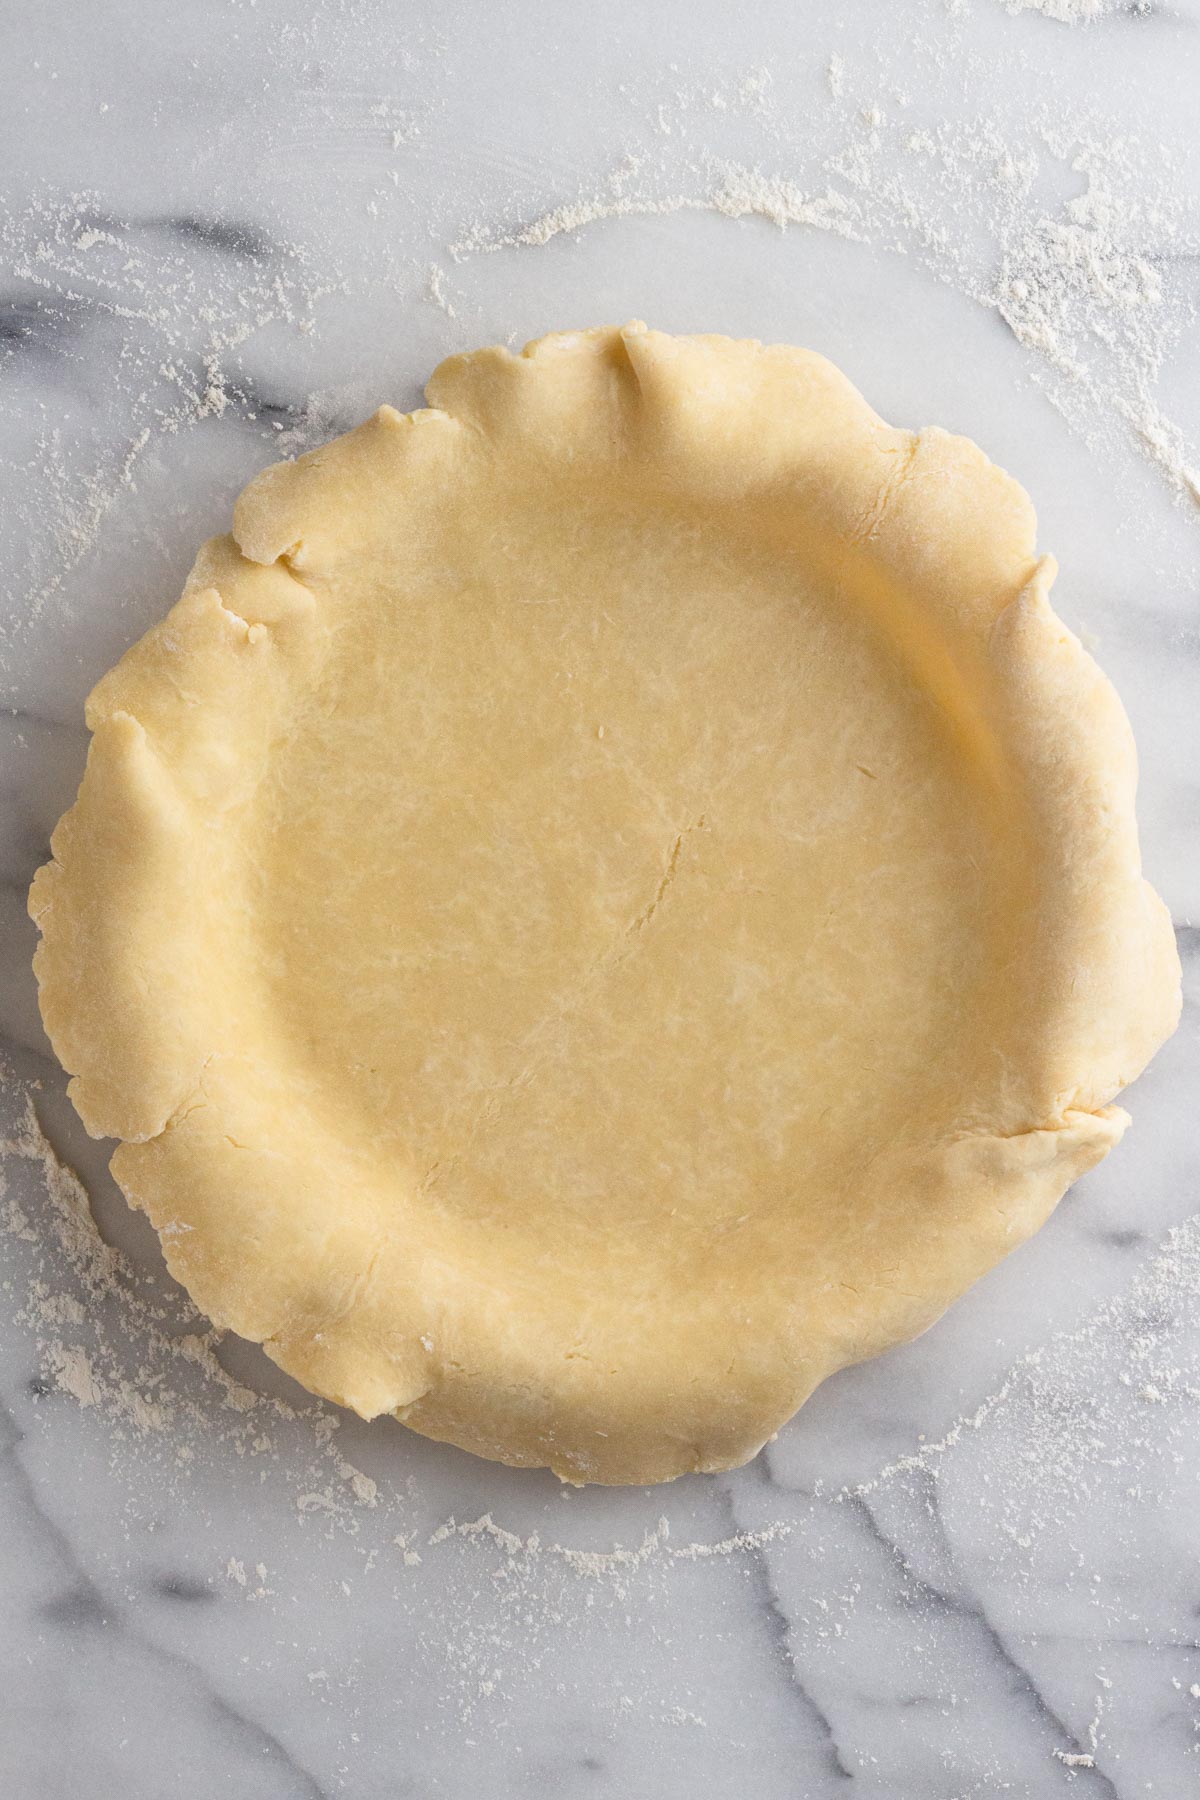 Pie crust in a pie plate on a marble surface.